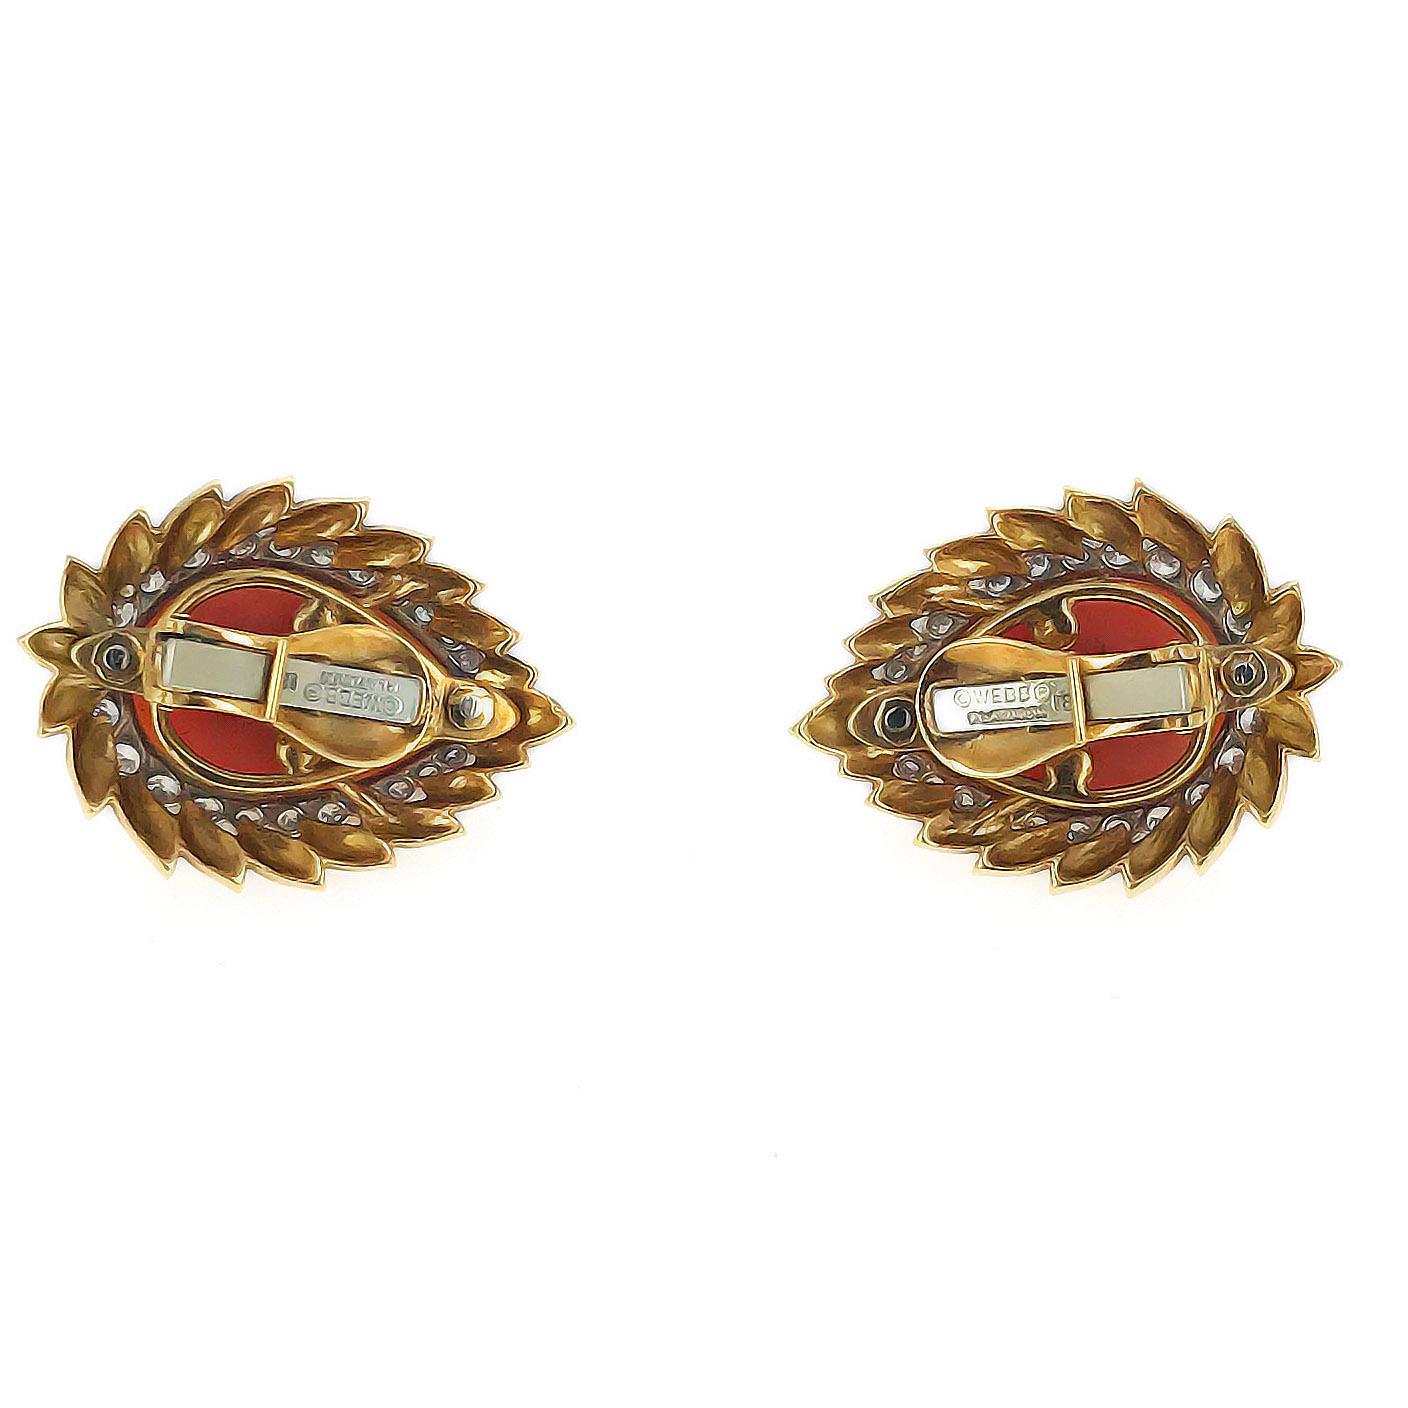 This beautiful pair of David Webb clip earrings is composed of carved fluted pear shaped coral surrounded by a halo of brilliant cut diamonds and set in 18 karat hammered yellow gold. Each measures approximately 3.3 x 2.5 cm.